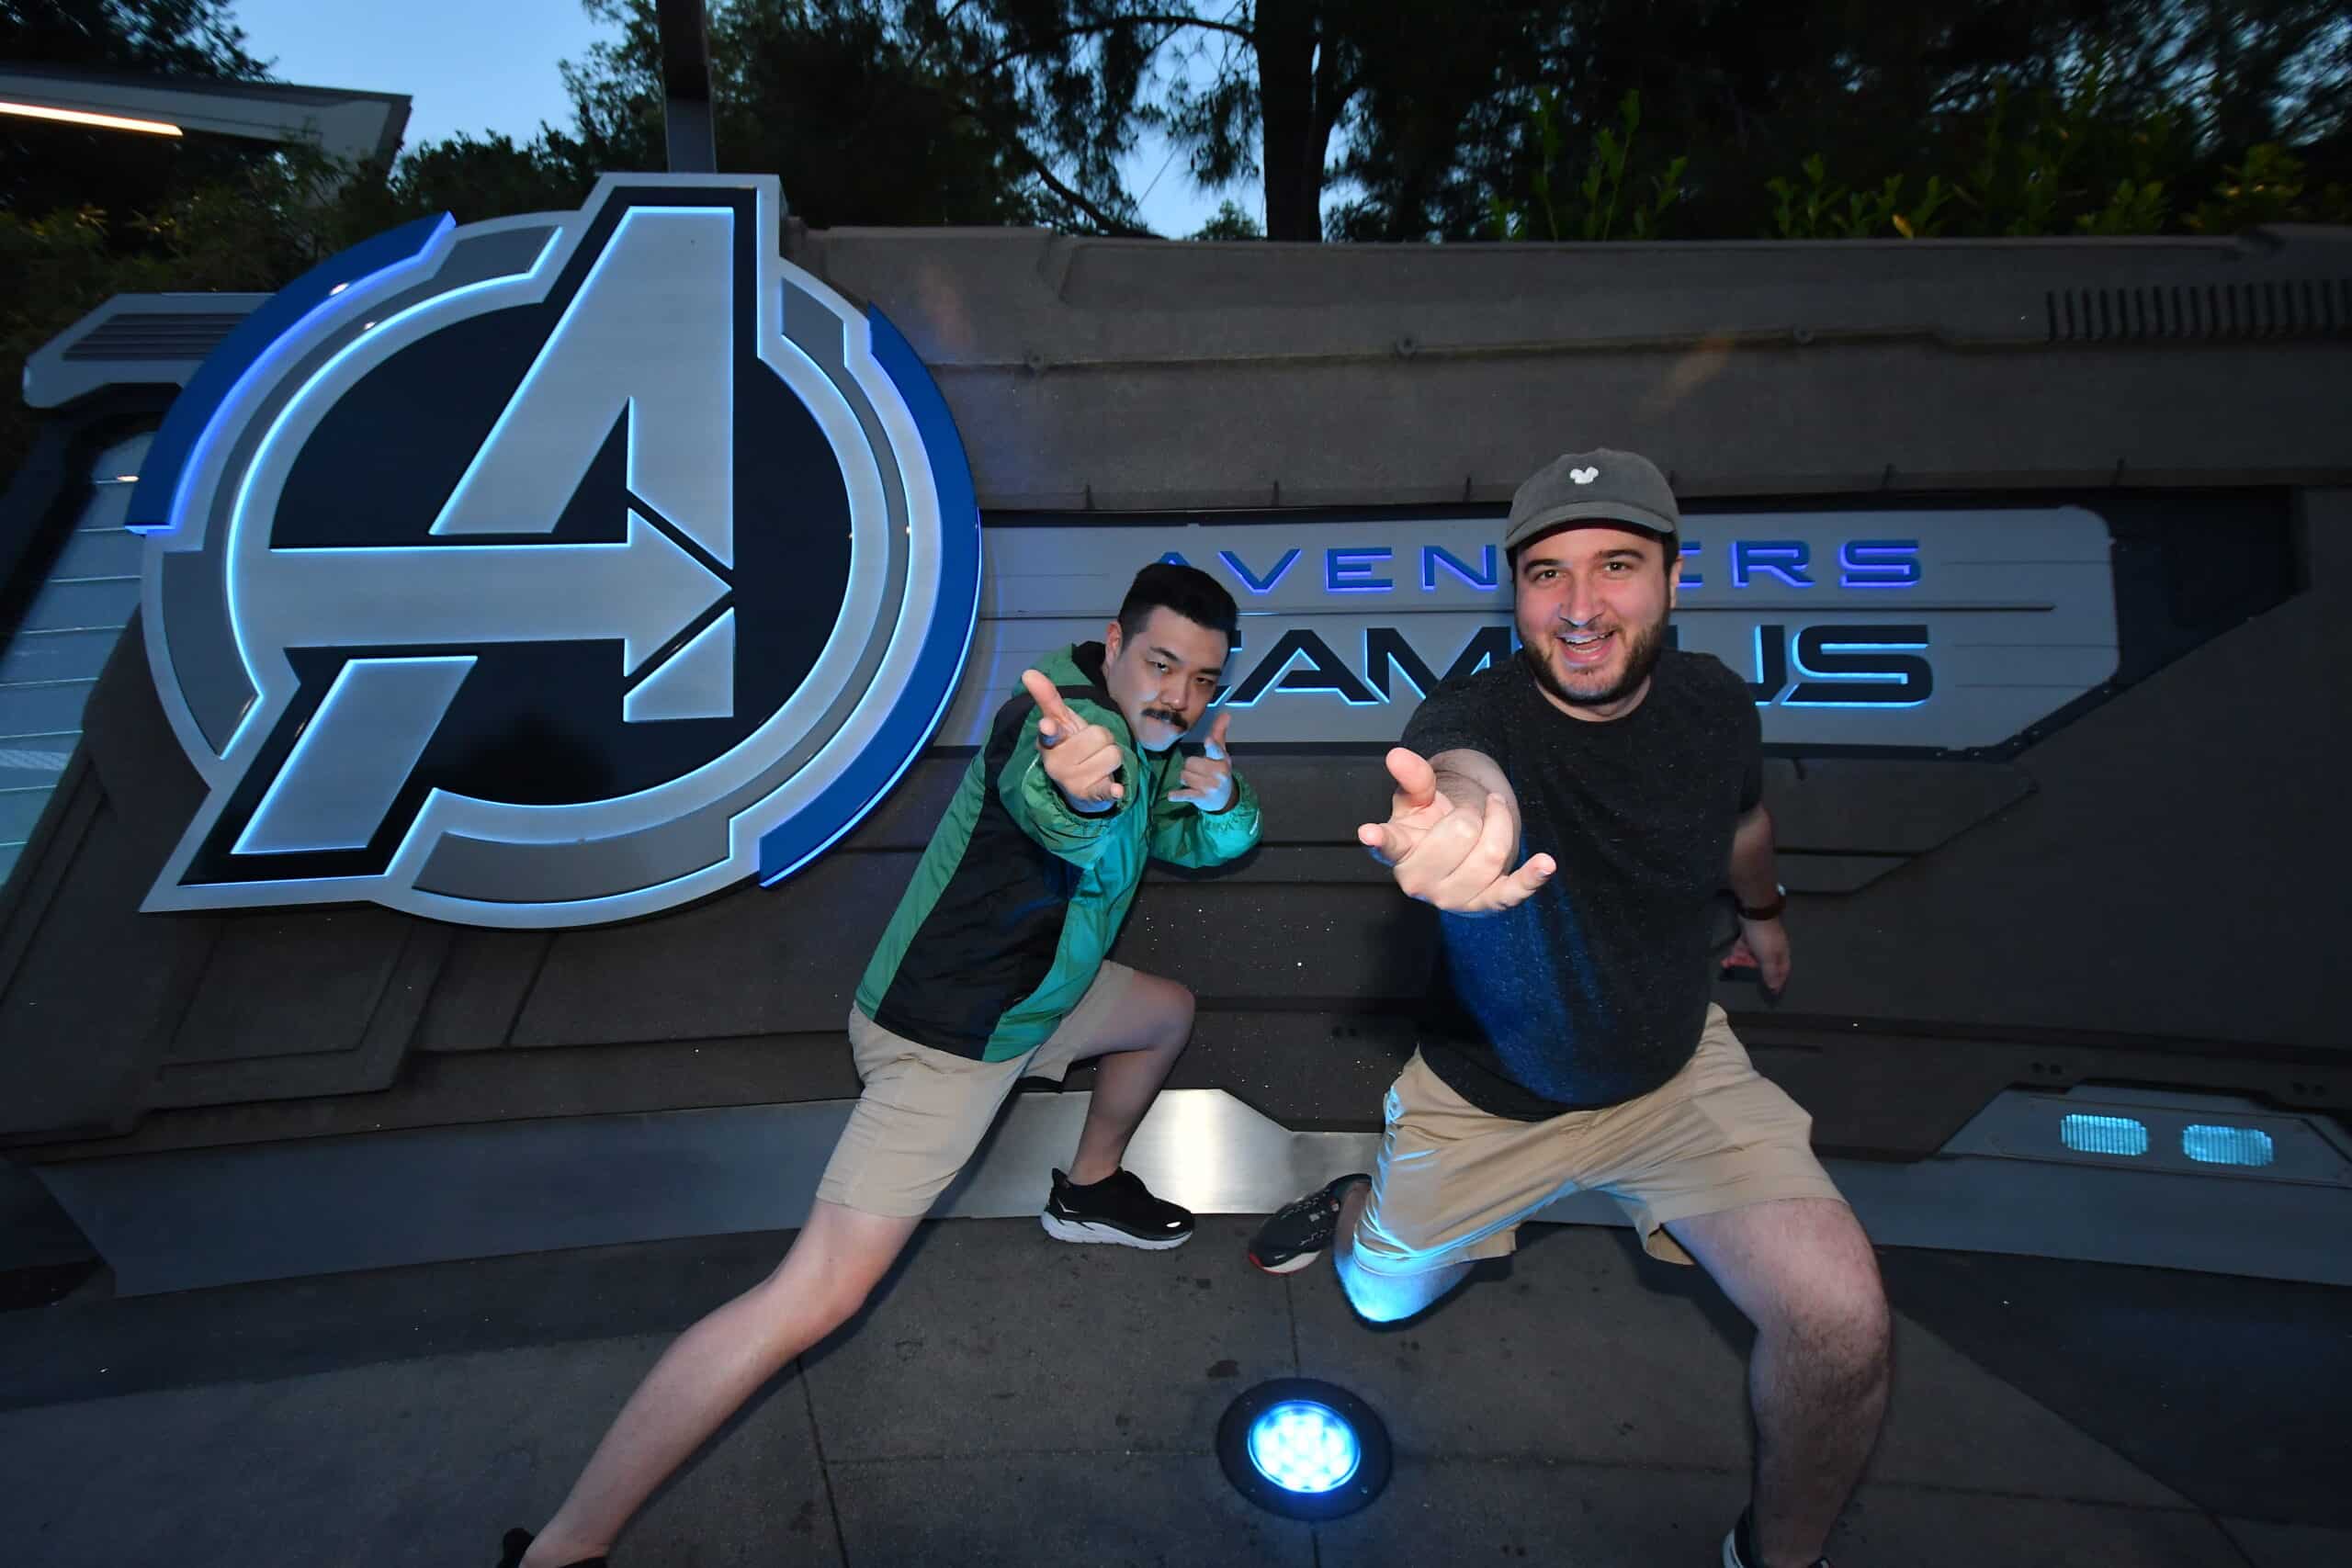 Josh and a friend pose ahead of an Avengers Campus sign. 